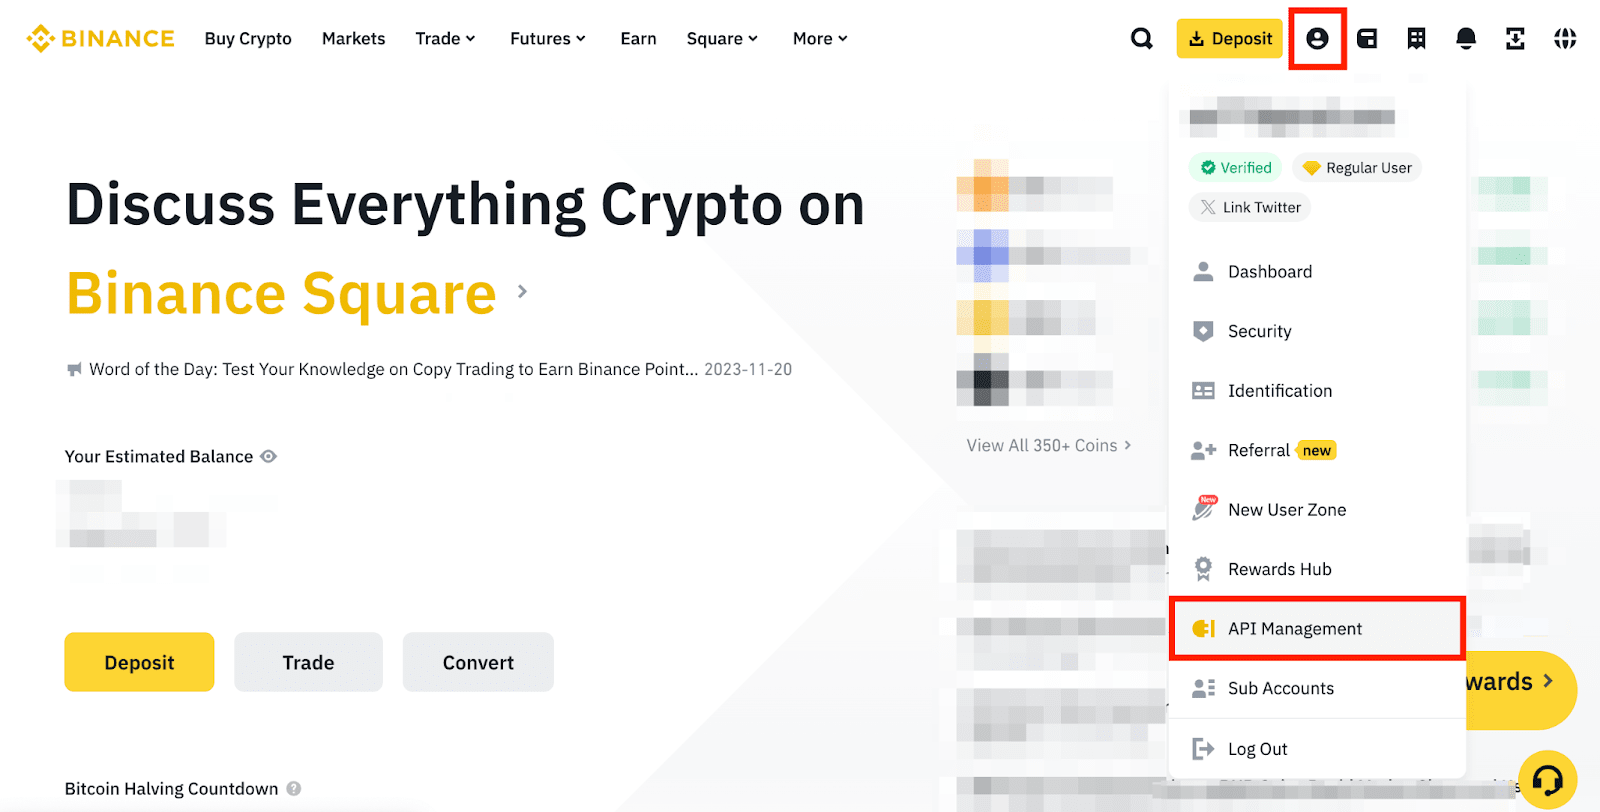 A Step-by-Step Guide to Getting Your Binance API Key